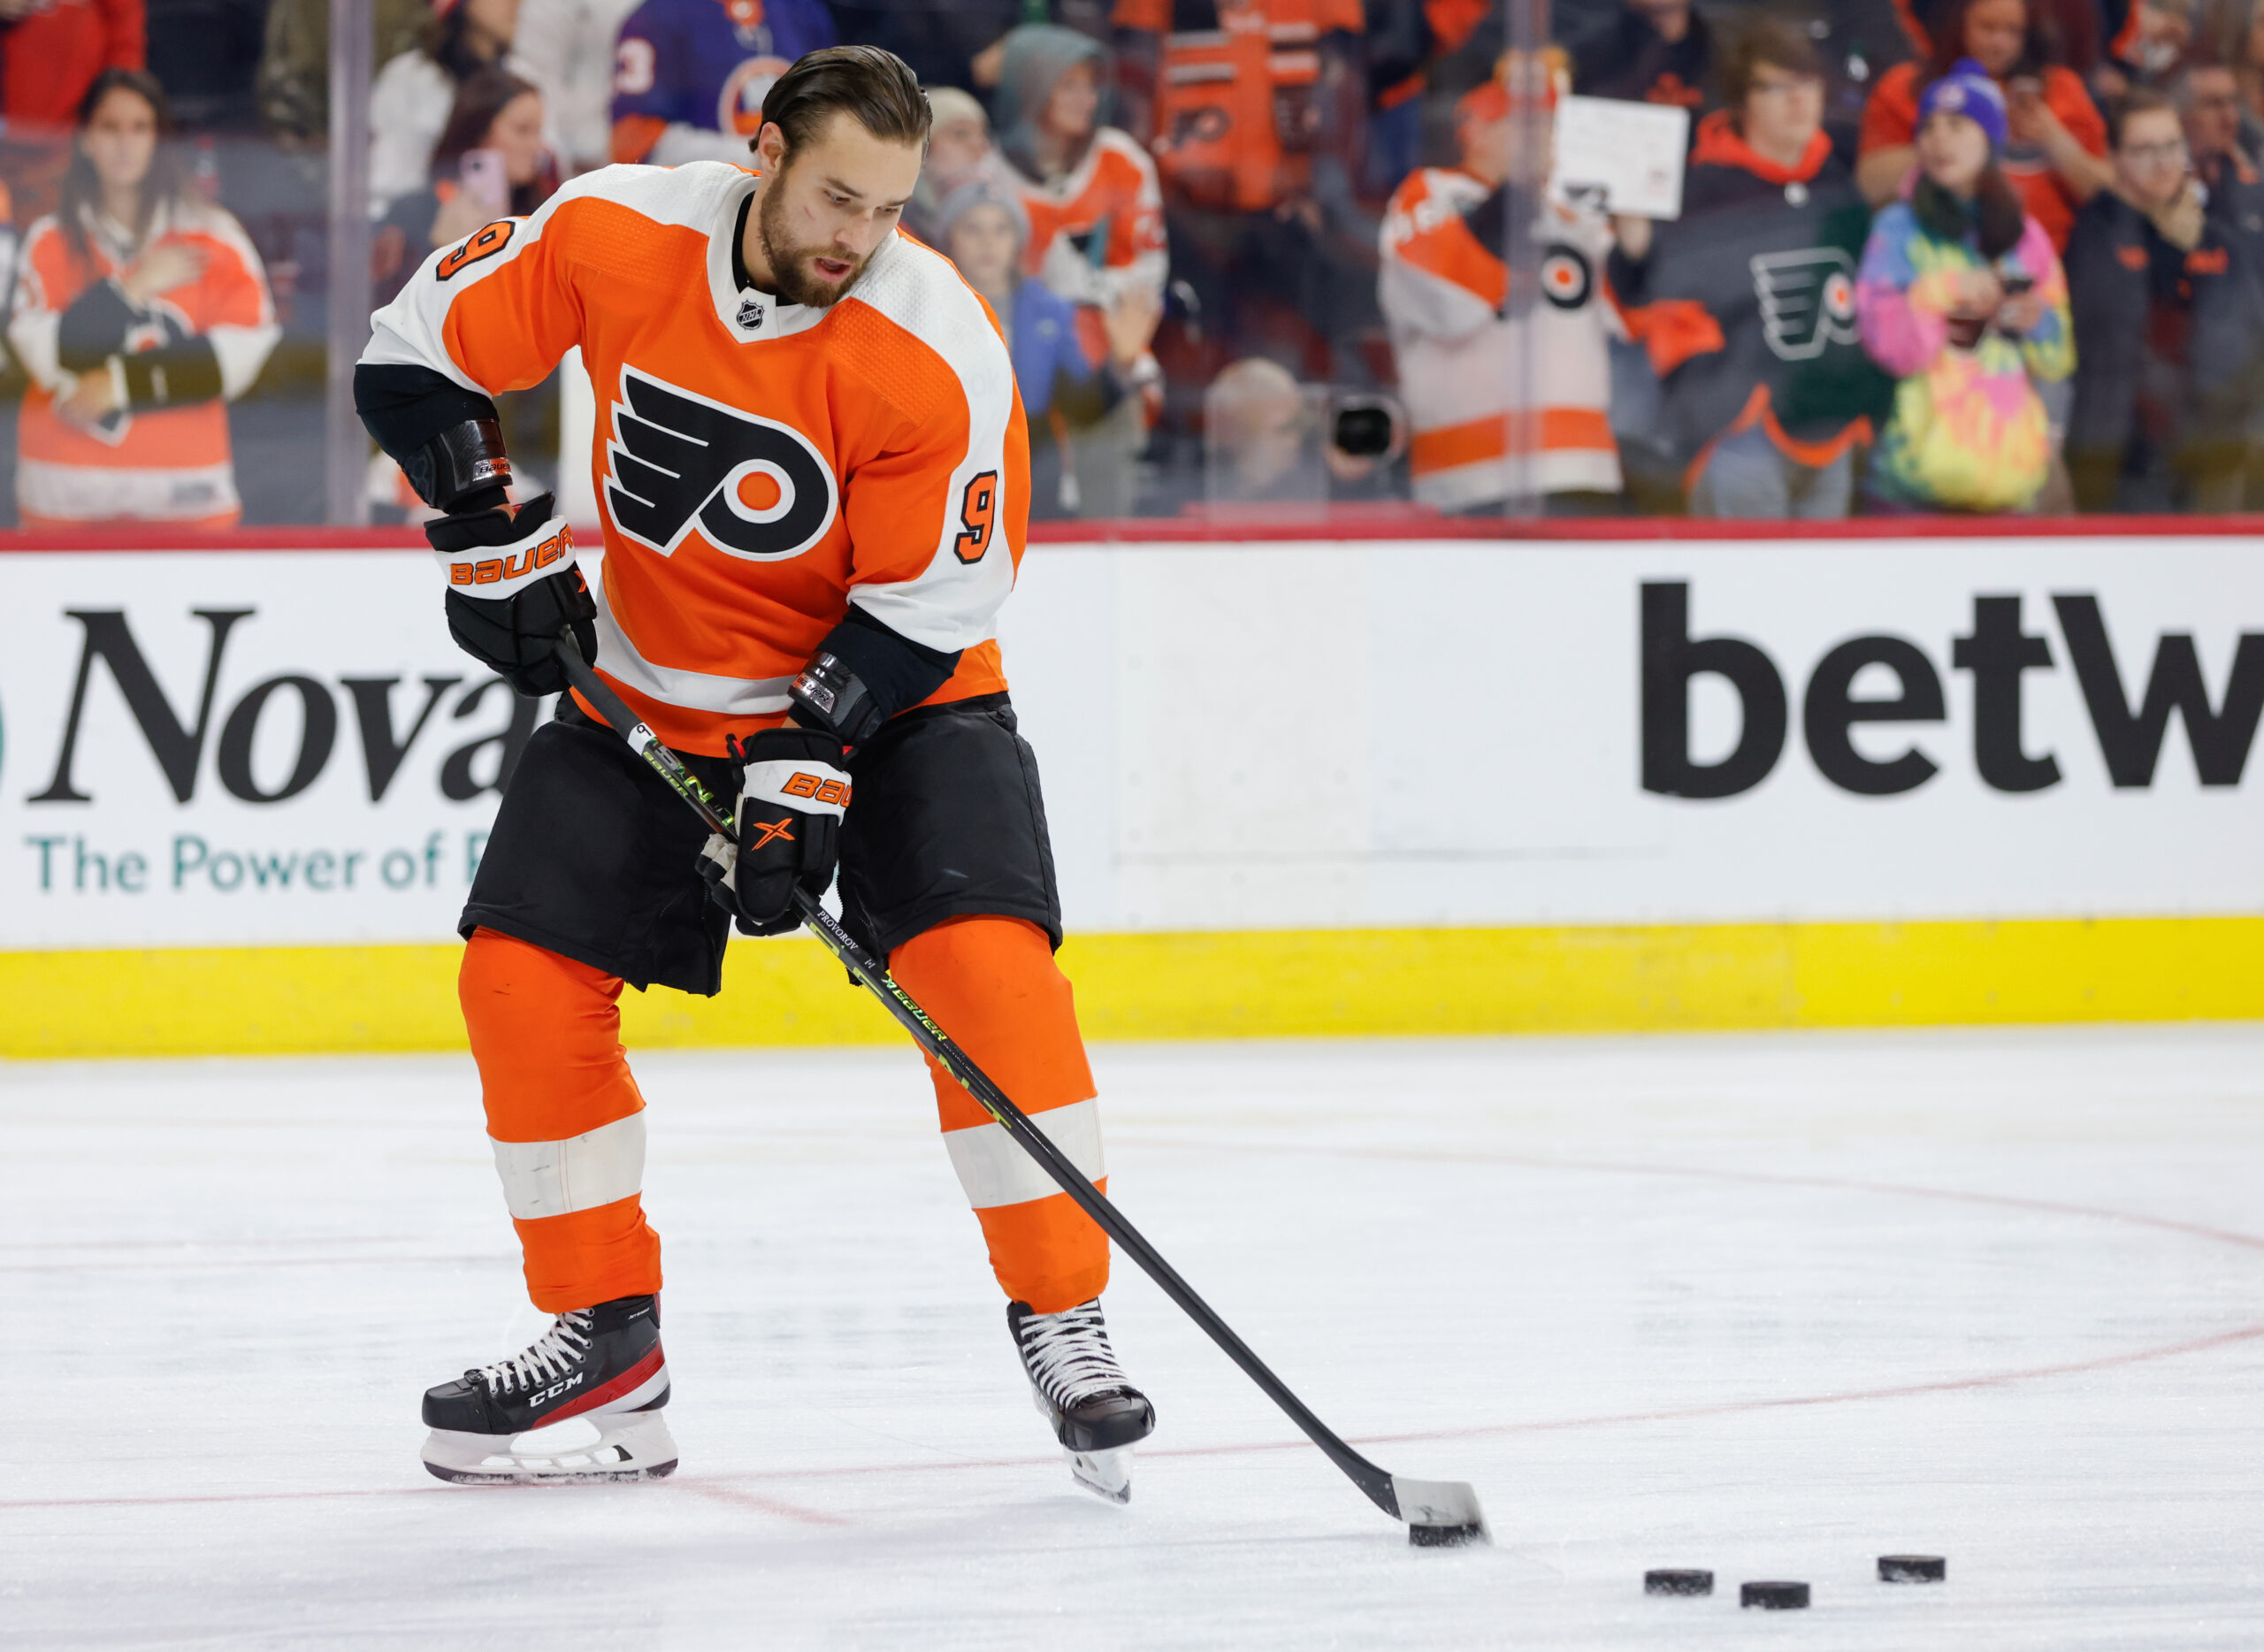 WOW! Ivan Provorov refused to participate in Flyers warmup tonight